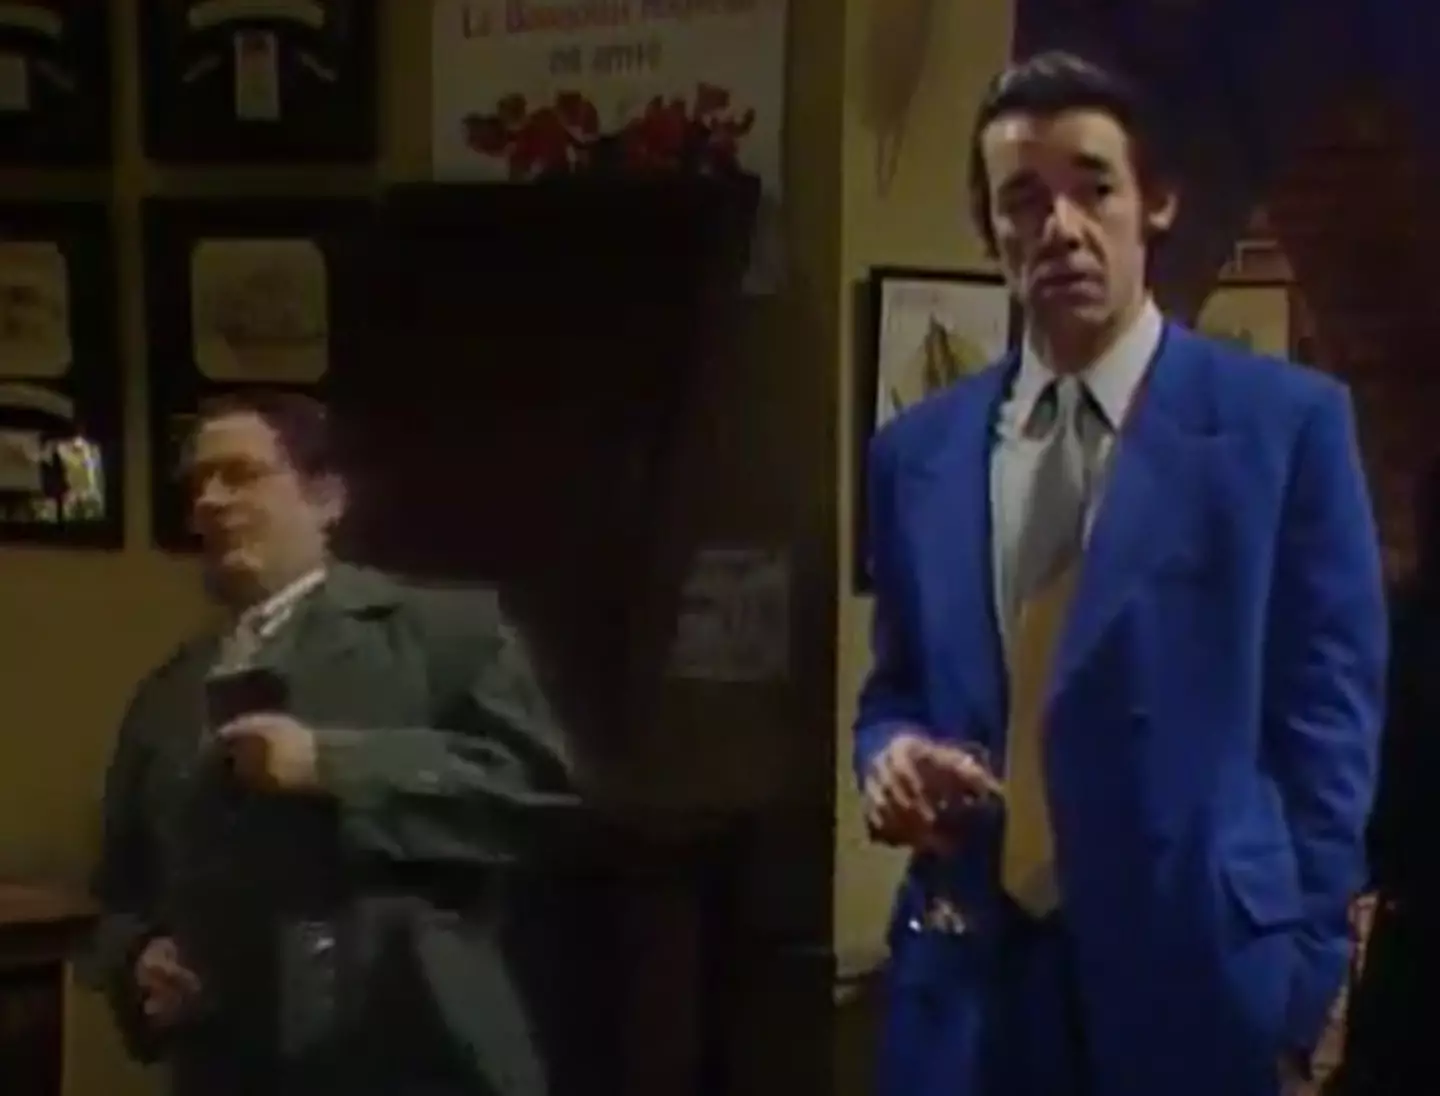 Roger Lloyd Pack wasn't meant to be part of this scene, but he was on set on the day and they stuck him in.